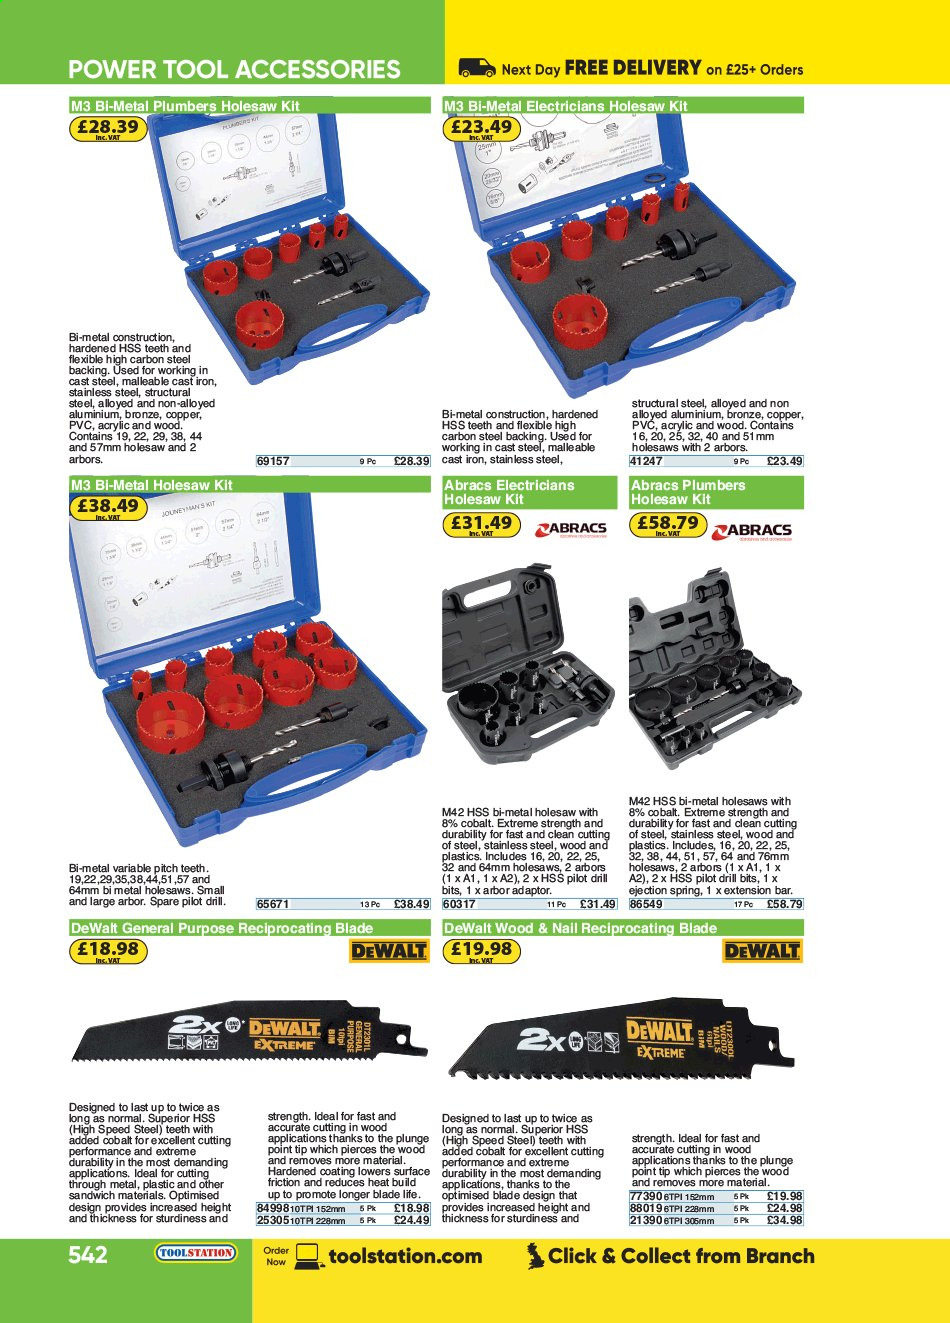 Toolstation offer . Page 542.